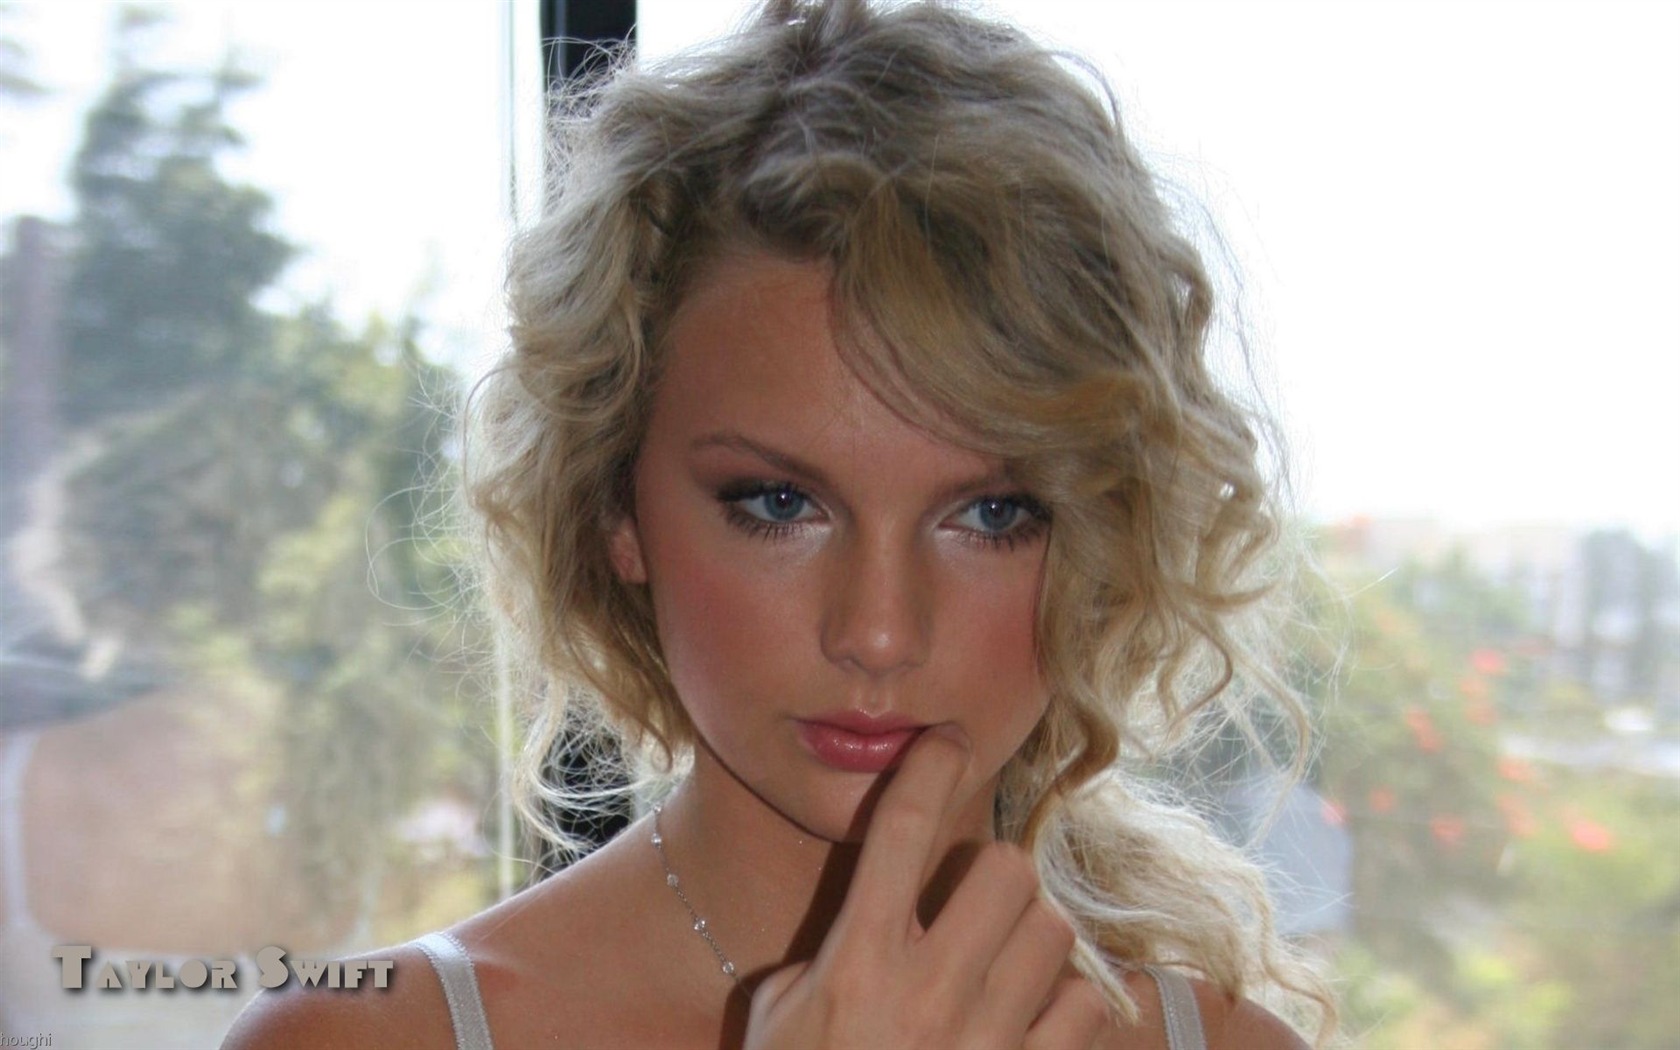 Taylor Swift #074 - 1680x1050 Wallpapers Pictures Photos Images